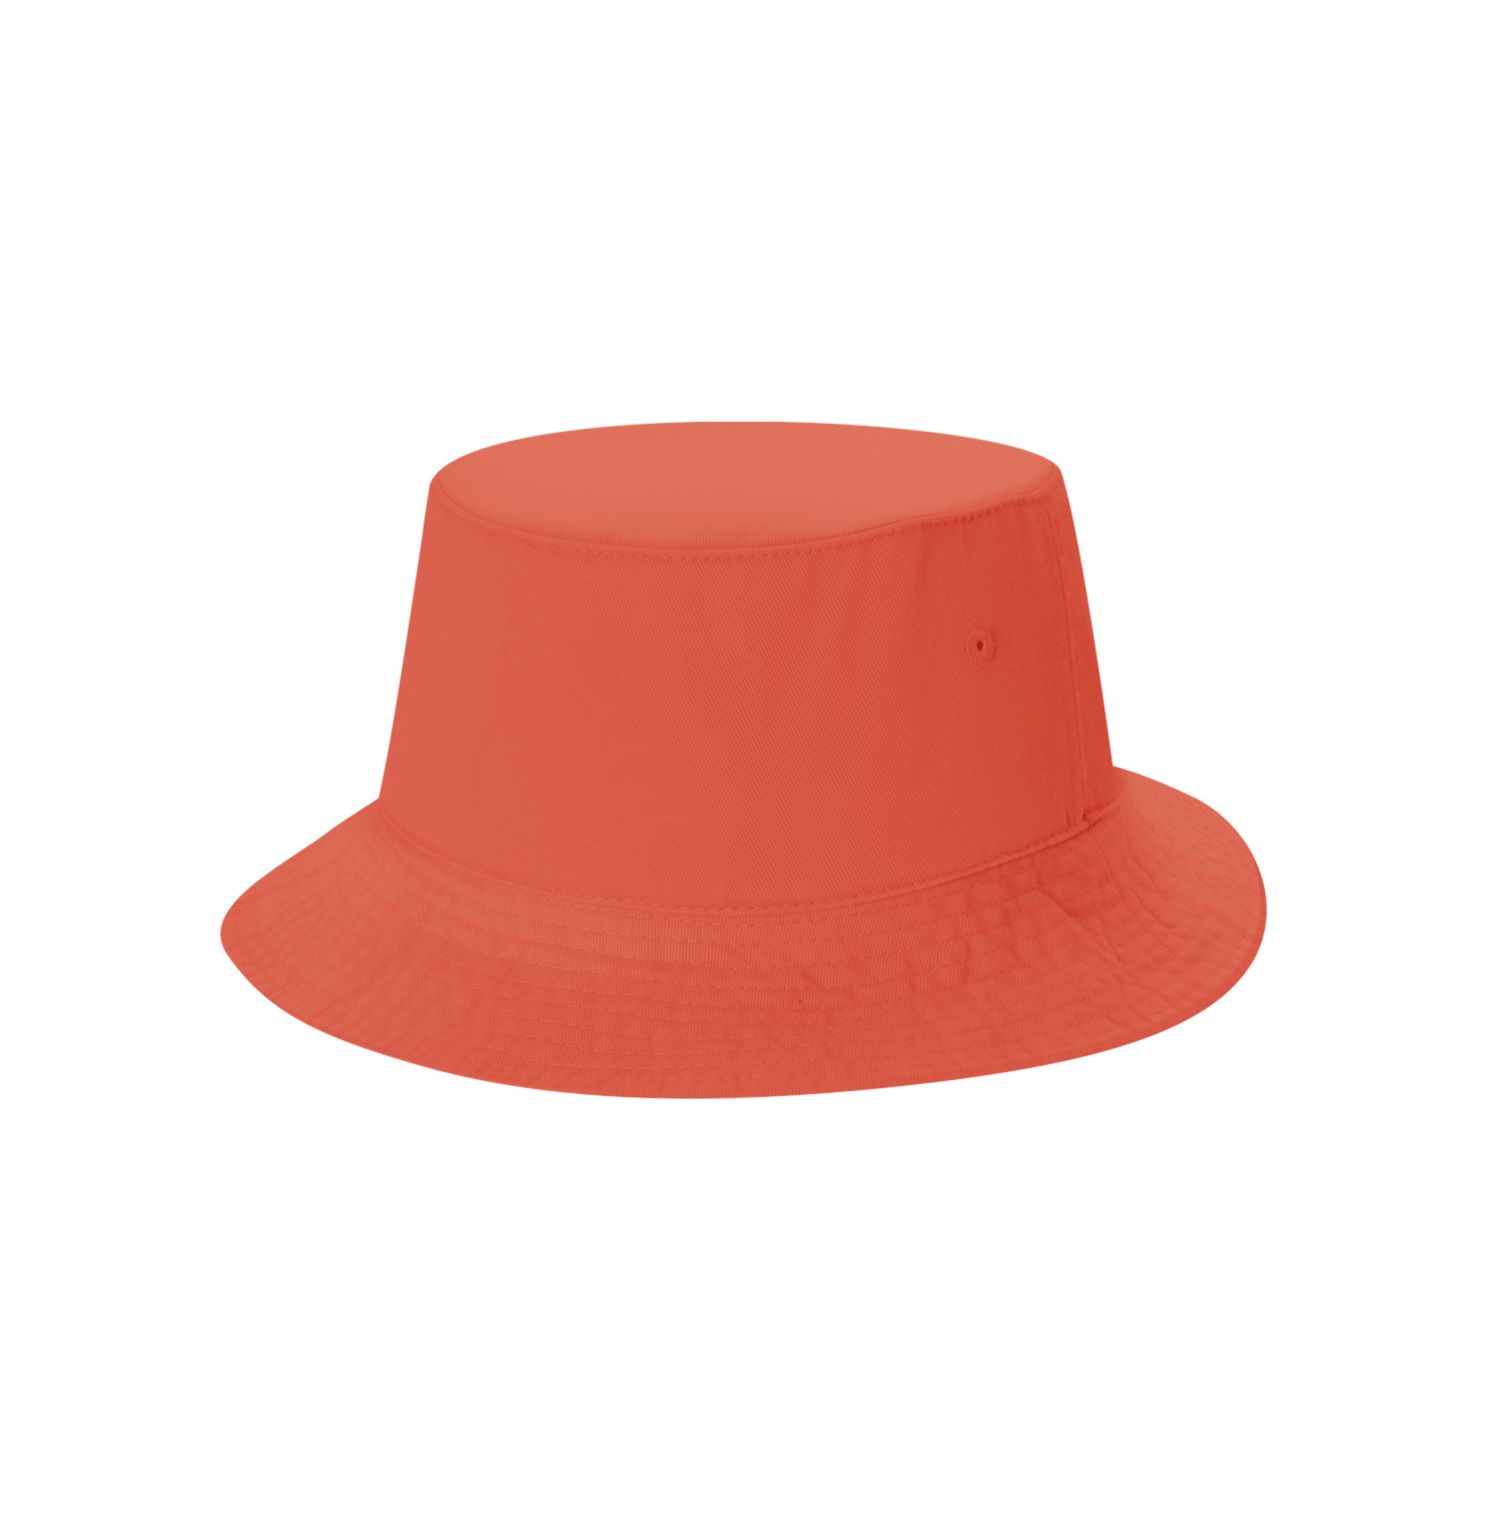 AJM Regular Dyed, Garment Washed Cotton Drill Deluxe Bucket Hat (Fitted) #6B100 Orange